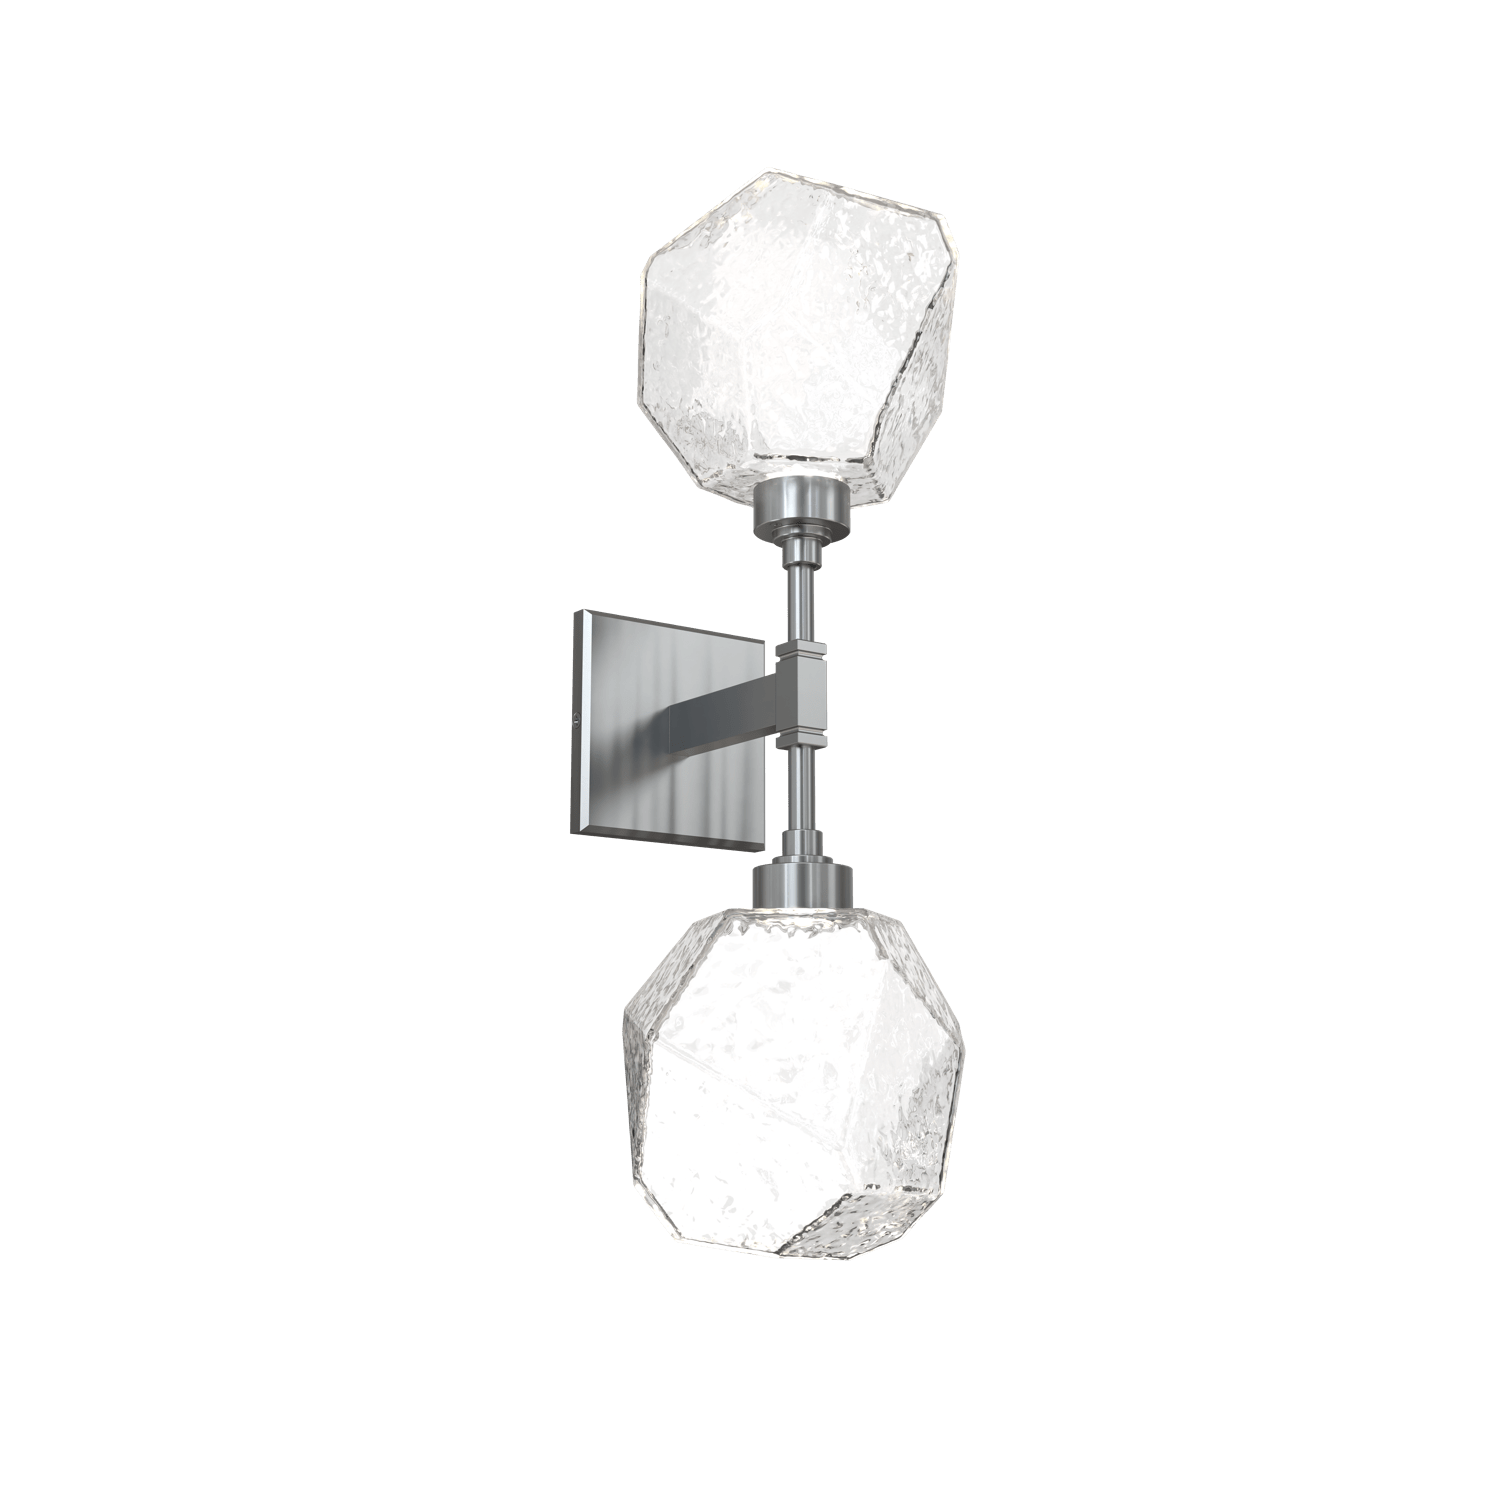 IDB0039-02-SN-C-Hammerton-Studio-Gem-double-wall-sconce-with-satin-nickel-finish-and-clear-blown-glass-shades-and-LED-lamping